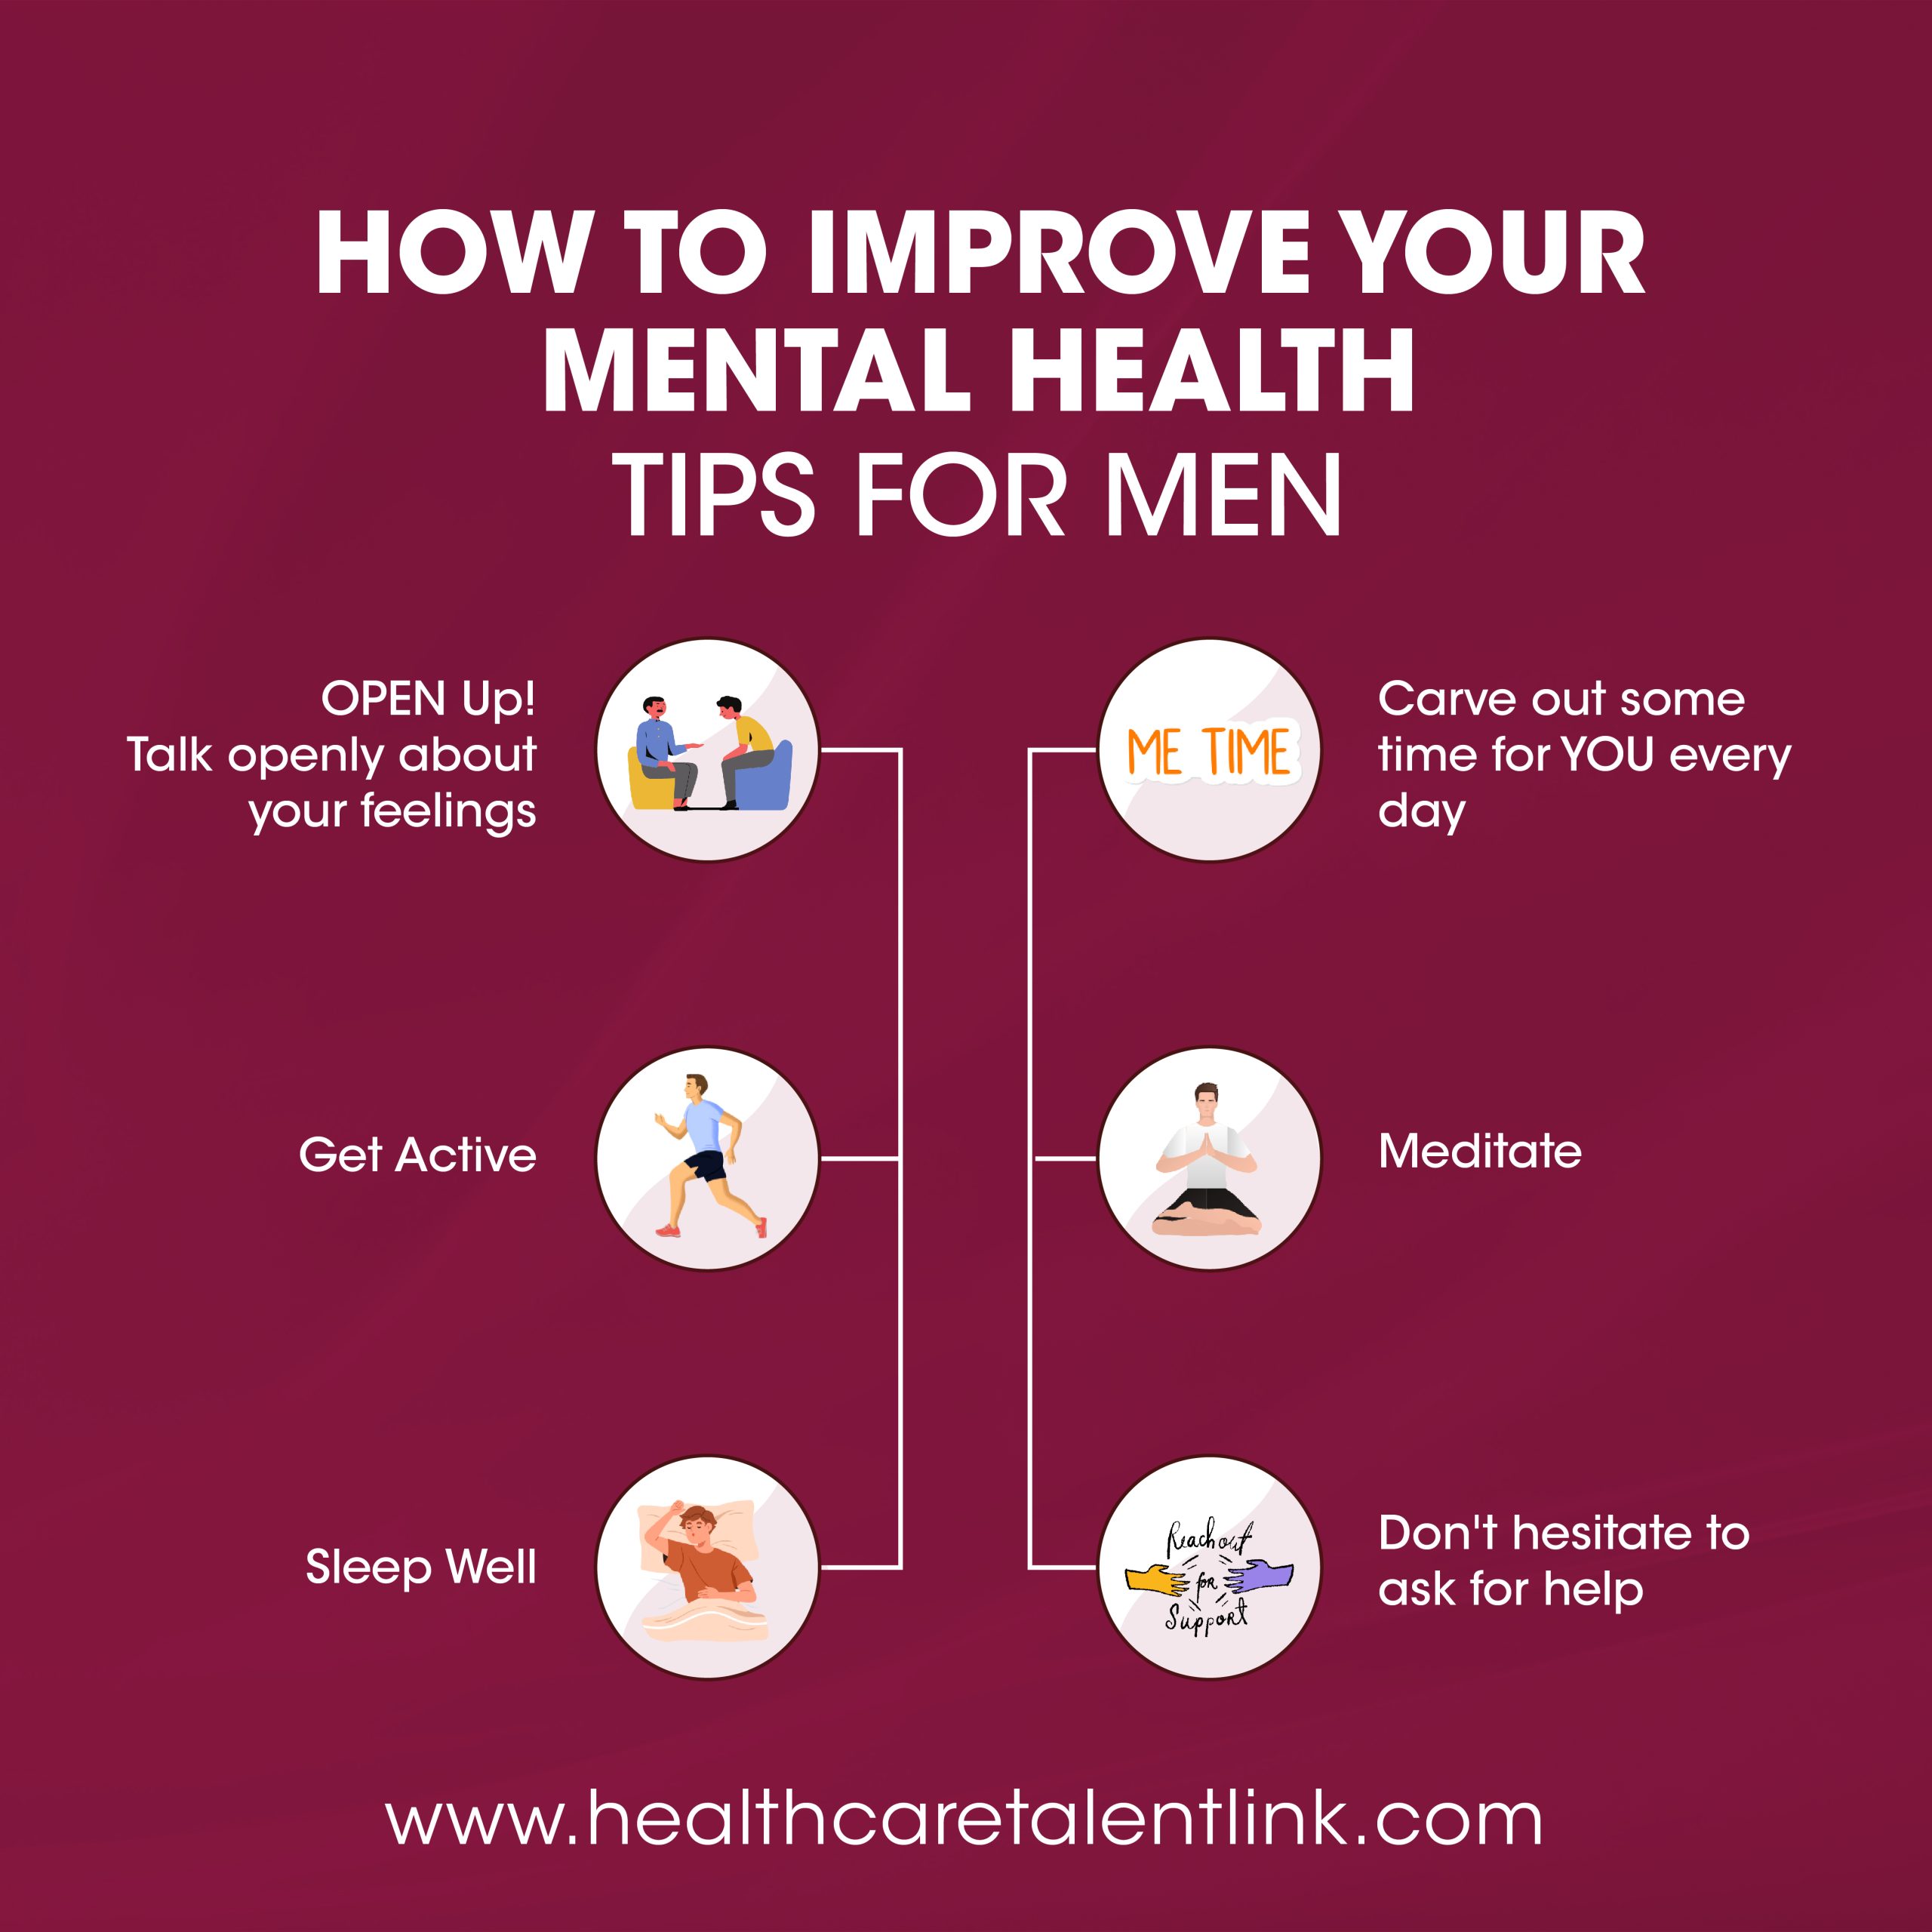 How to Improve Your Mental Health - Tips for Men